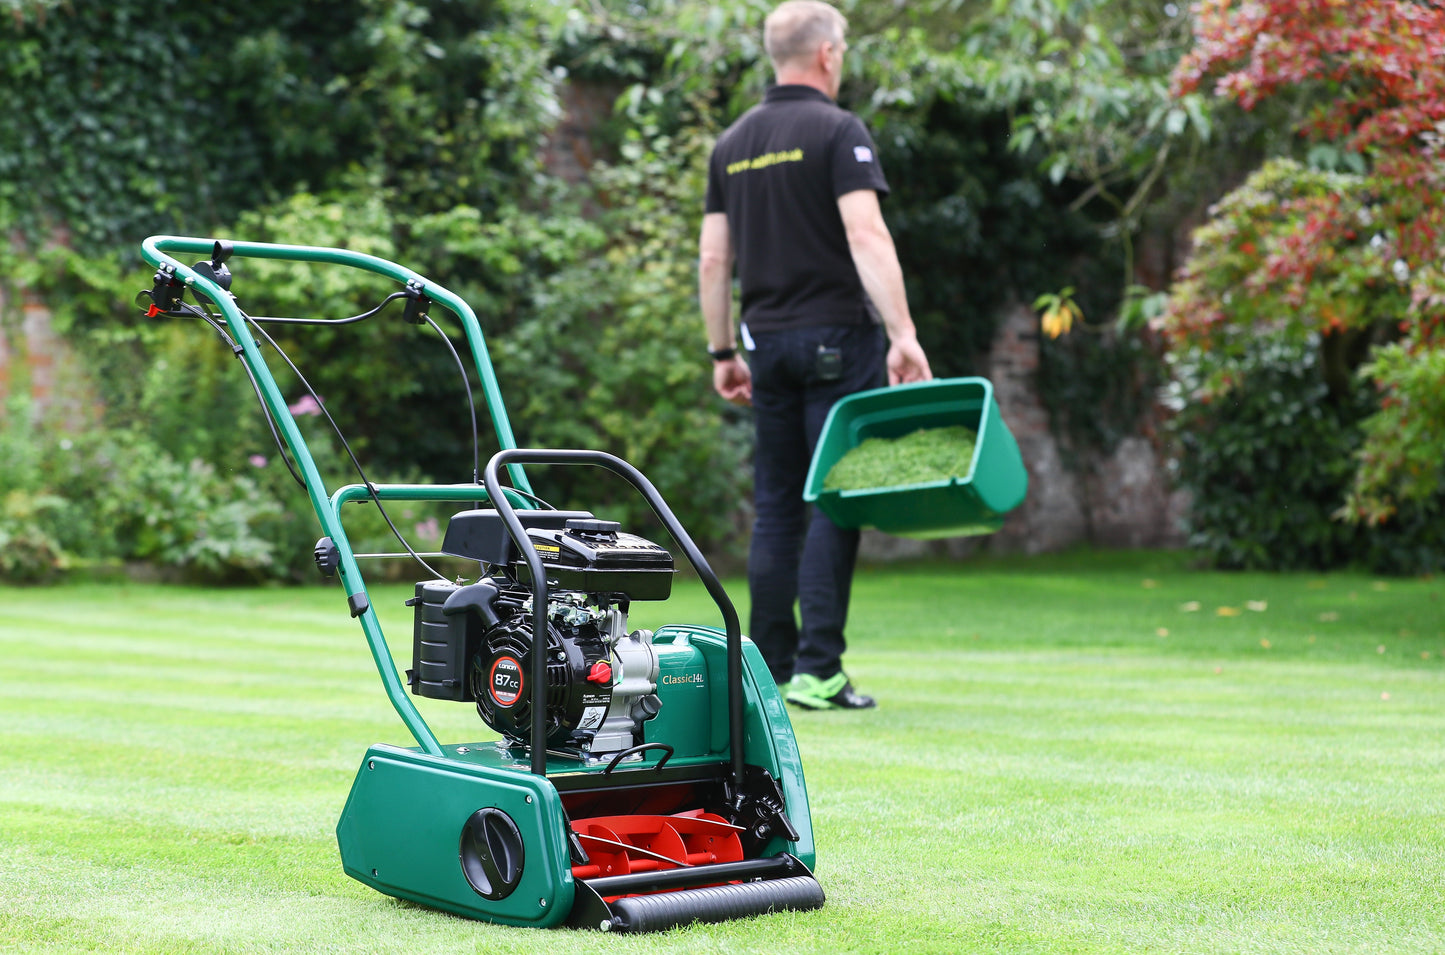 The Allett Classic Cylinder Mower